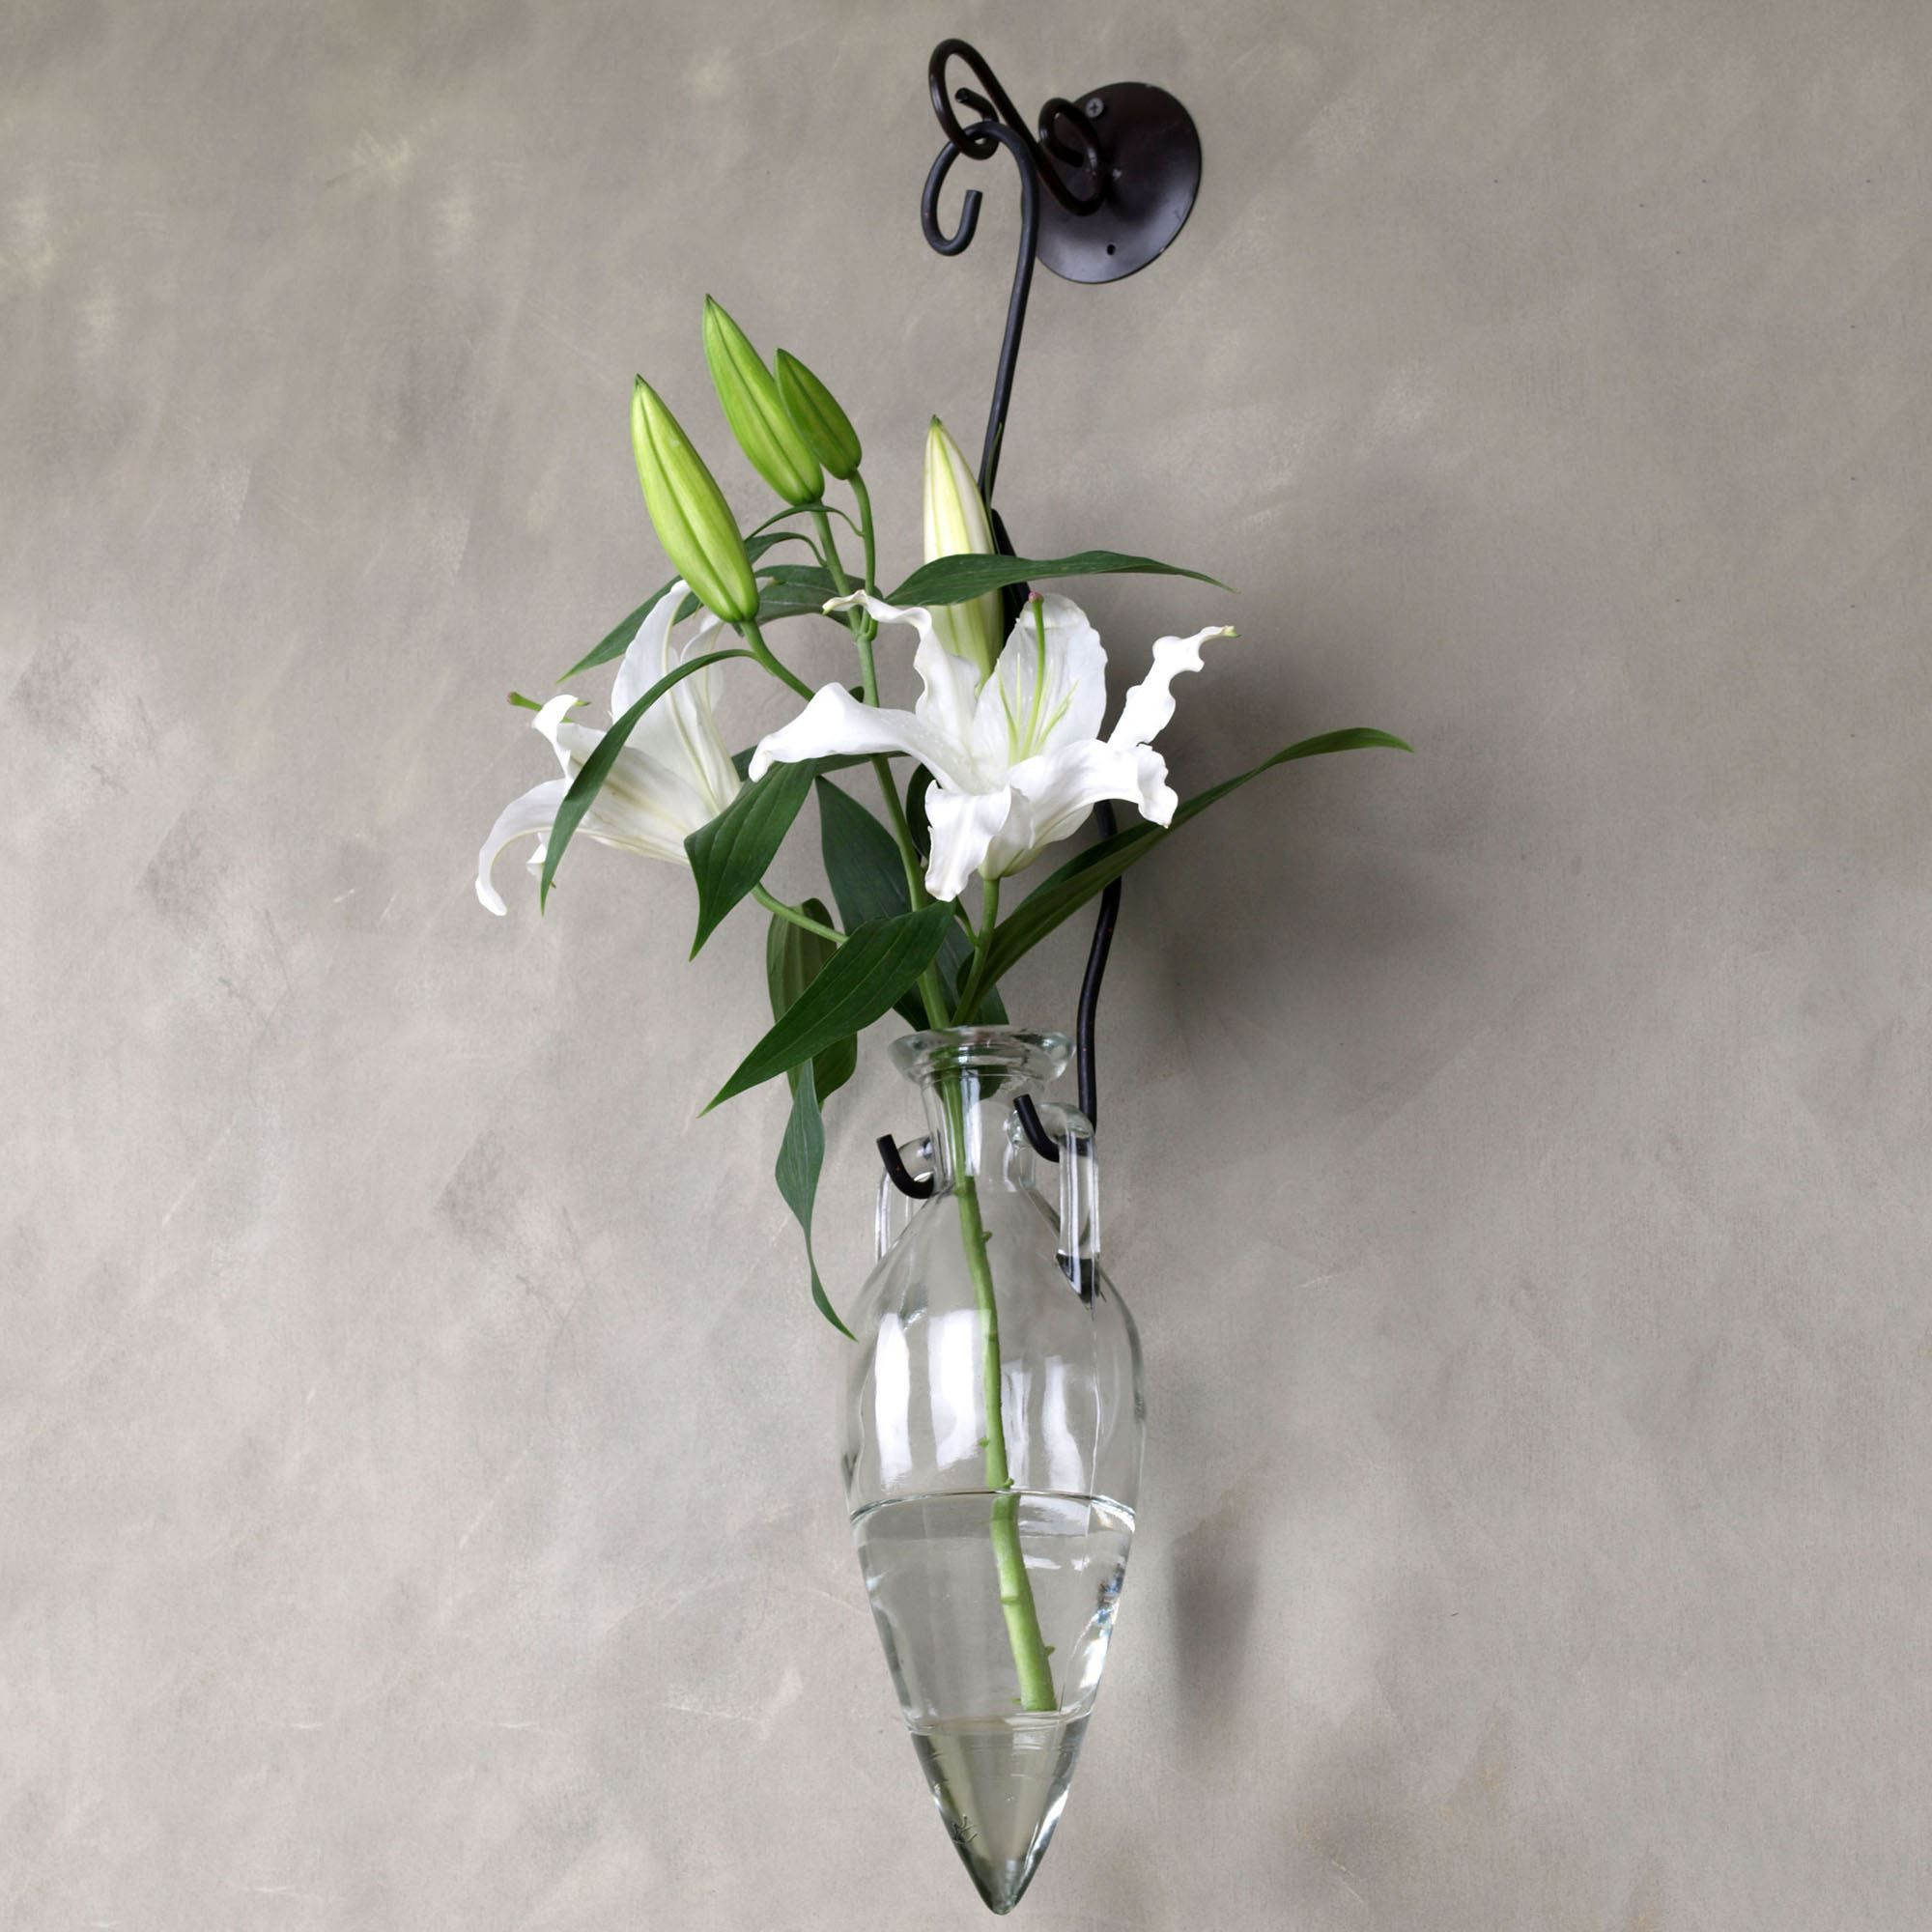 28 Ideal Inexpensive Vases for Centerpieces 2024 free download inexpensive vases for centerpieces of 24 types of vases for flowers the weekly world in h vases wall hanging flower vase newspaper i 0d scheme wall scheme